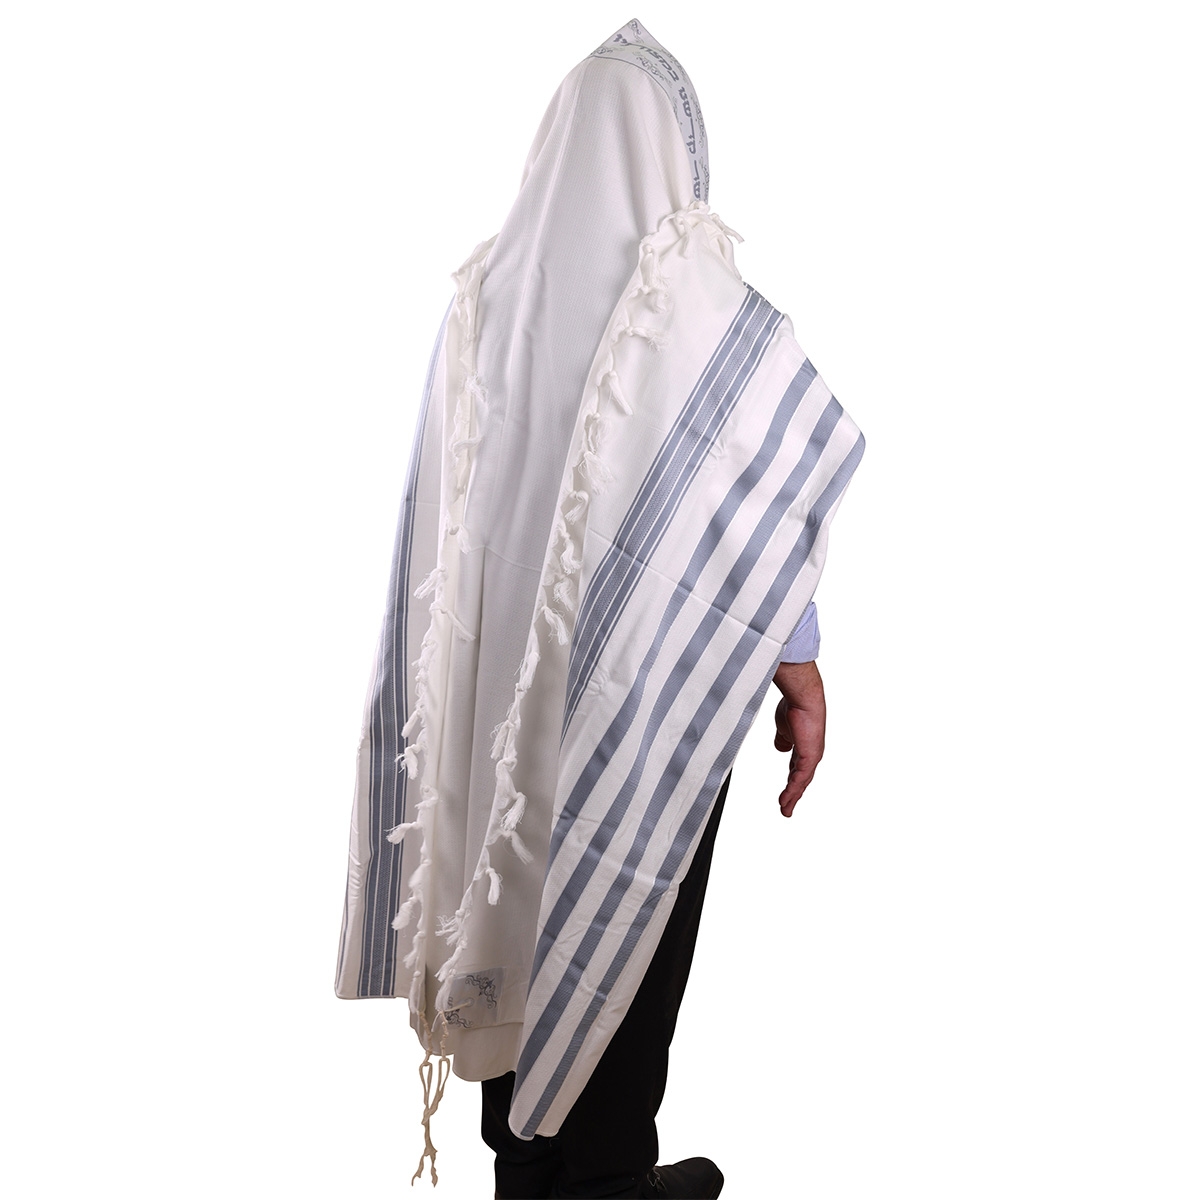 Grey cotton jersey with handmade tzitzit (15:38) – Yoffi ‒ The